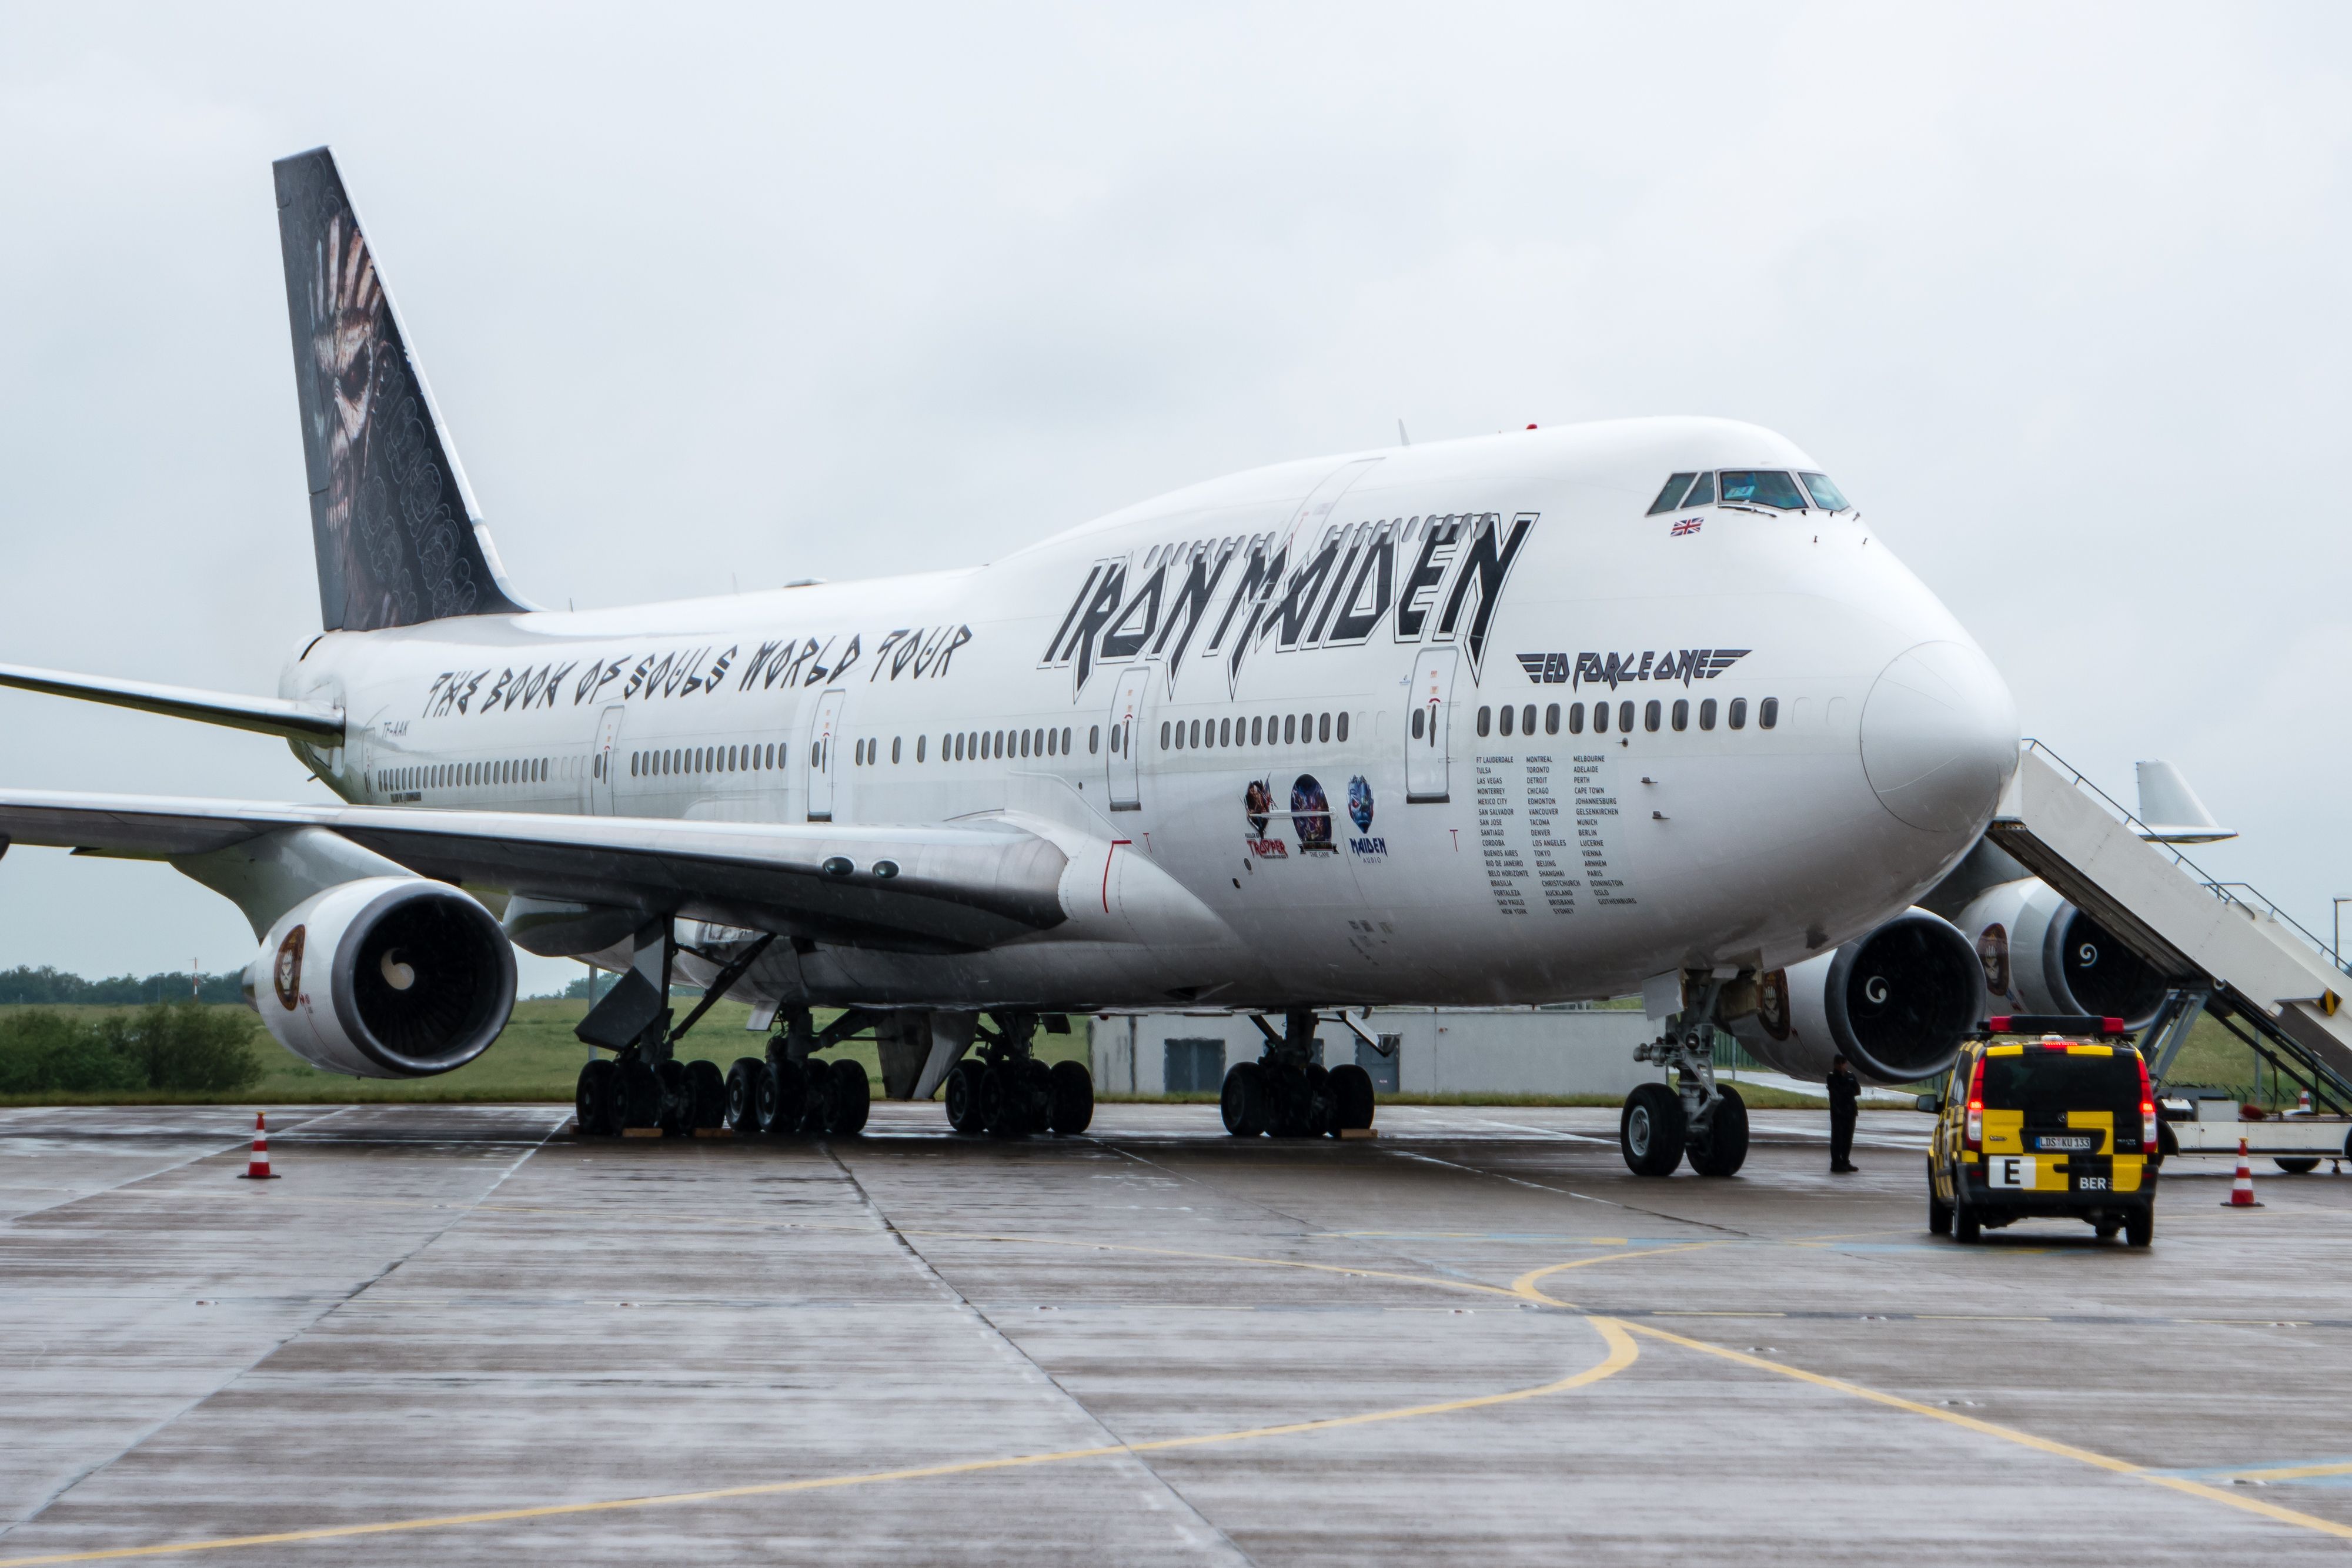 Iron Maiden's Boeing 747 Ed Force One parked on an airport apron.